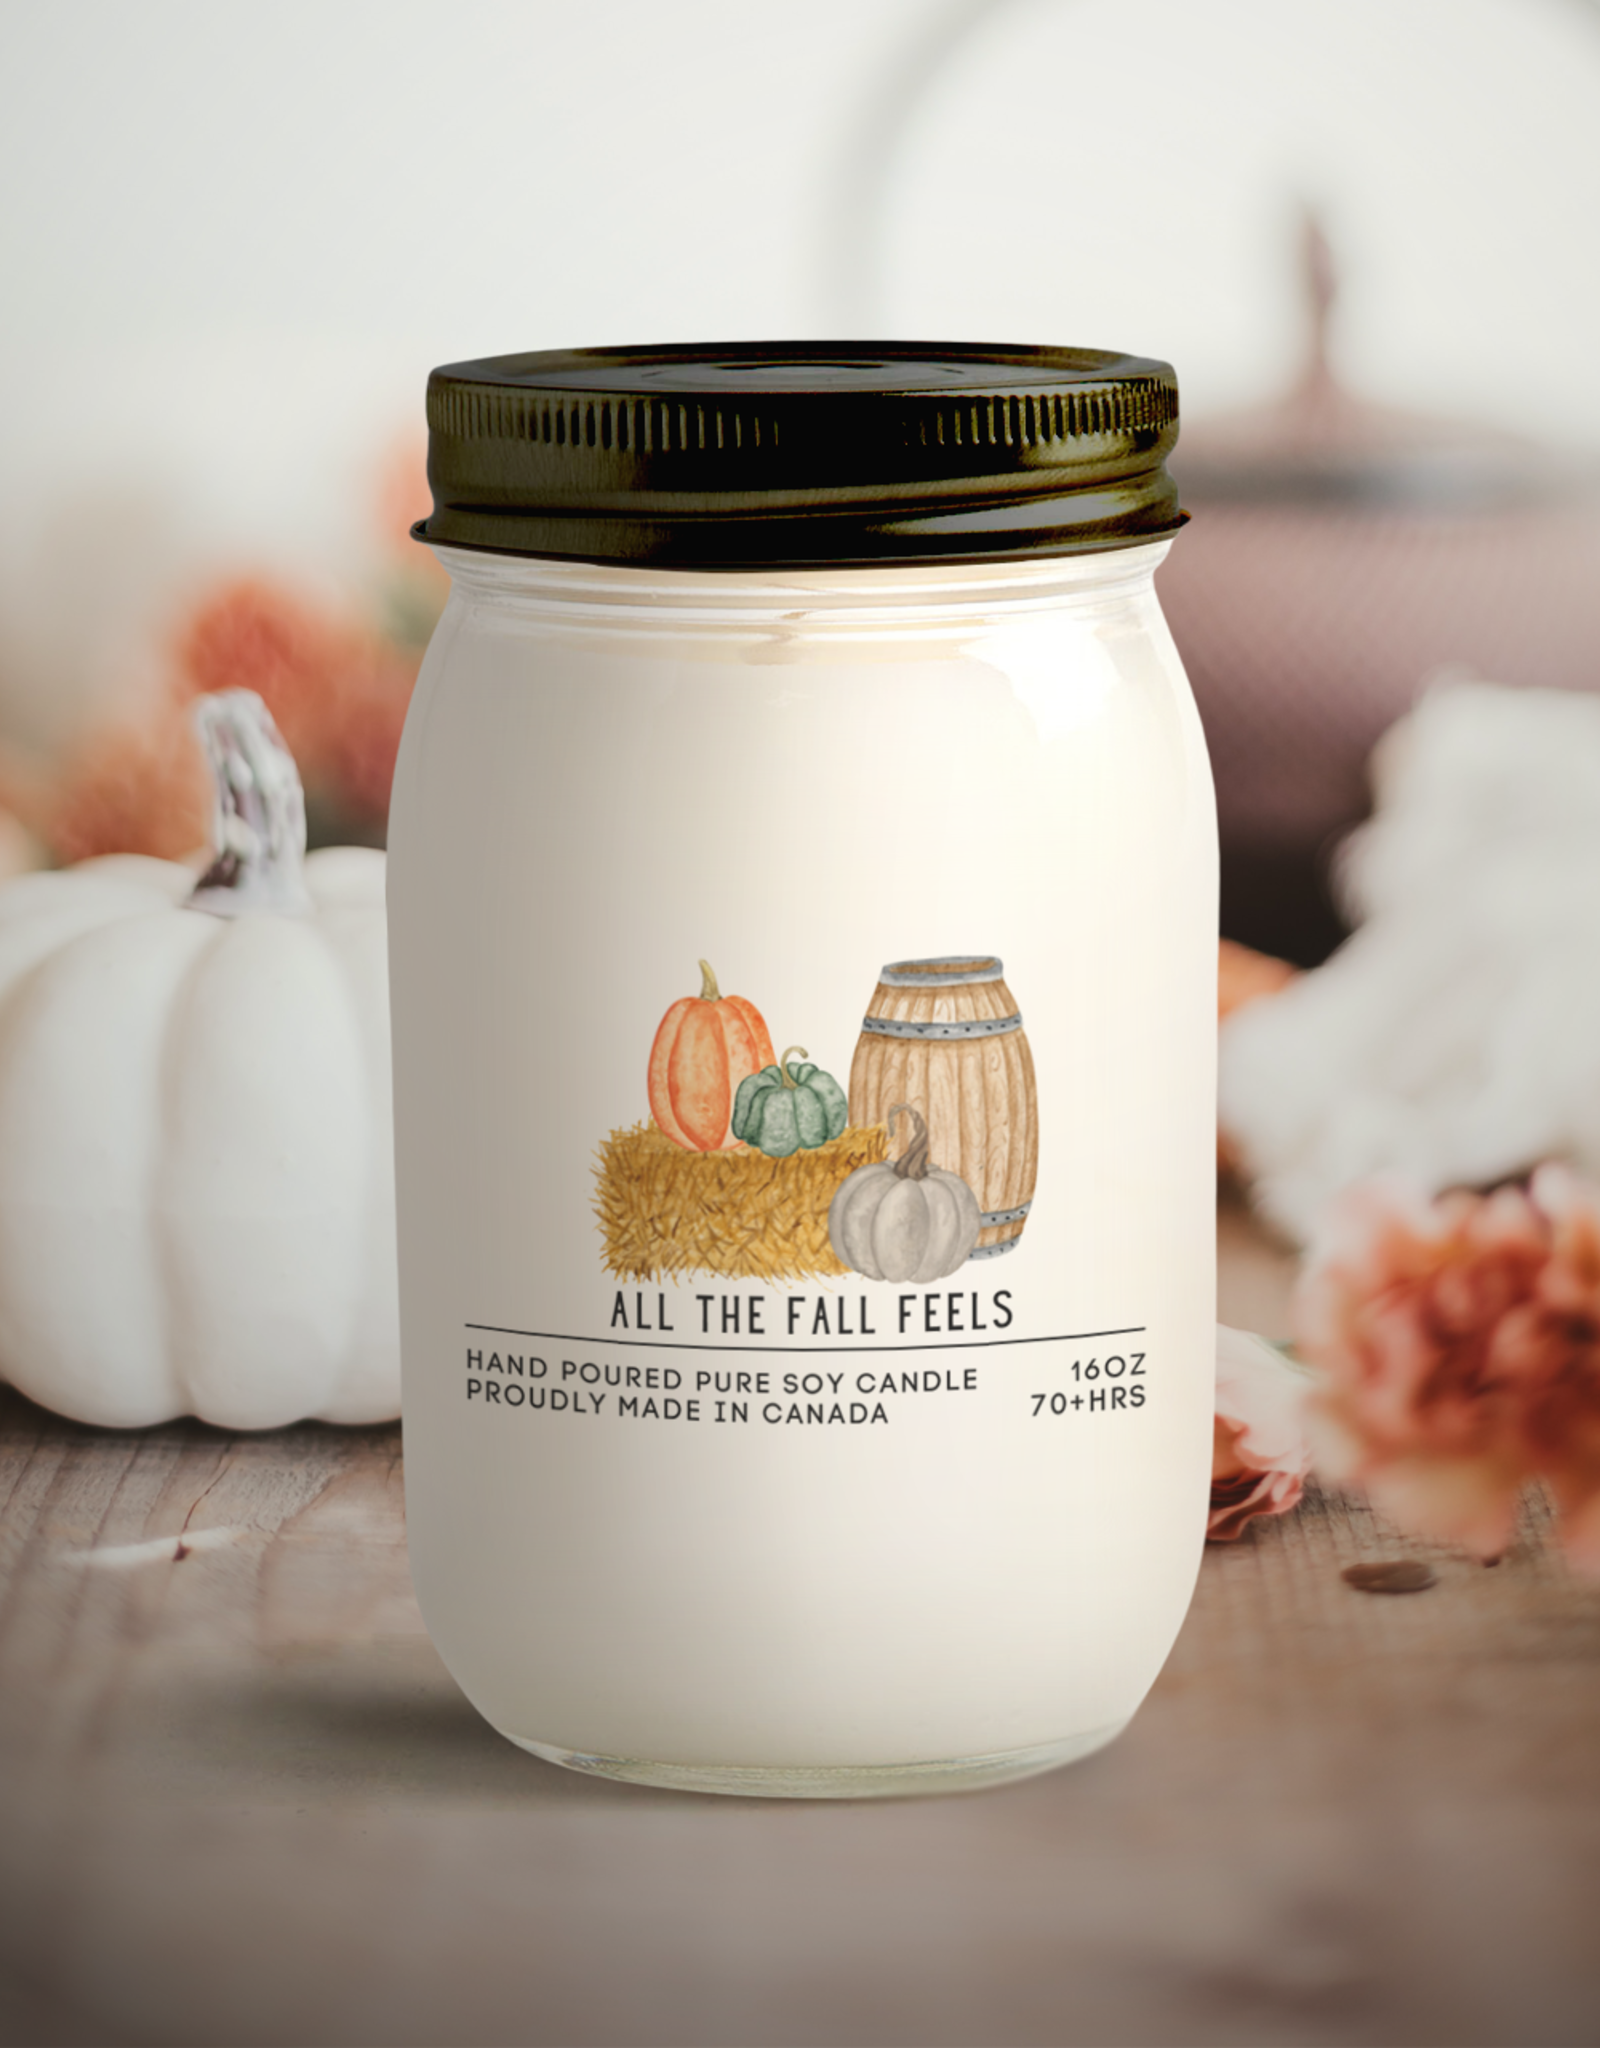 Serendipity Soy Candles 16oz Jar Candle - All The Fall Feels